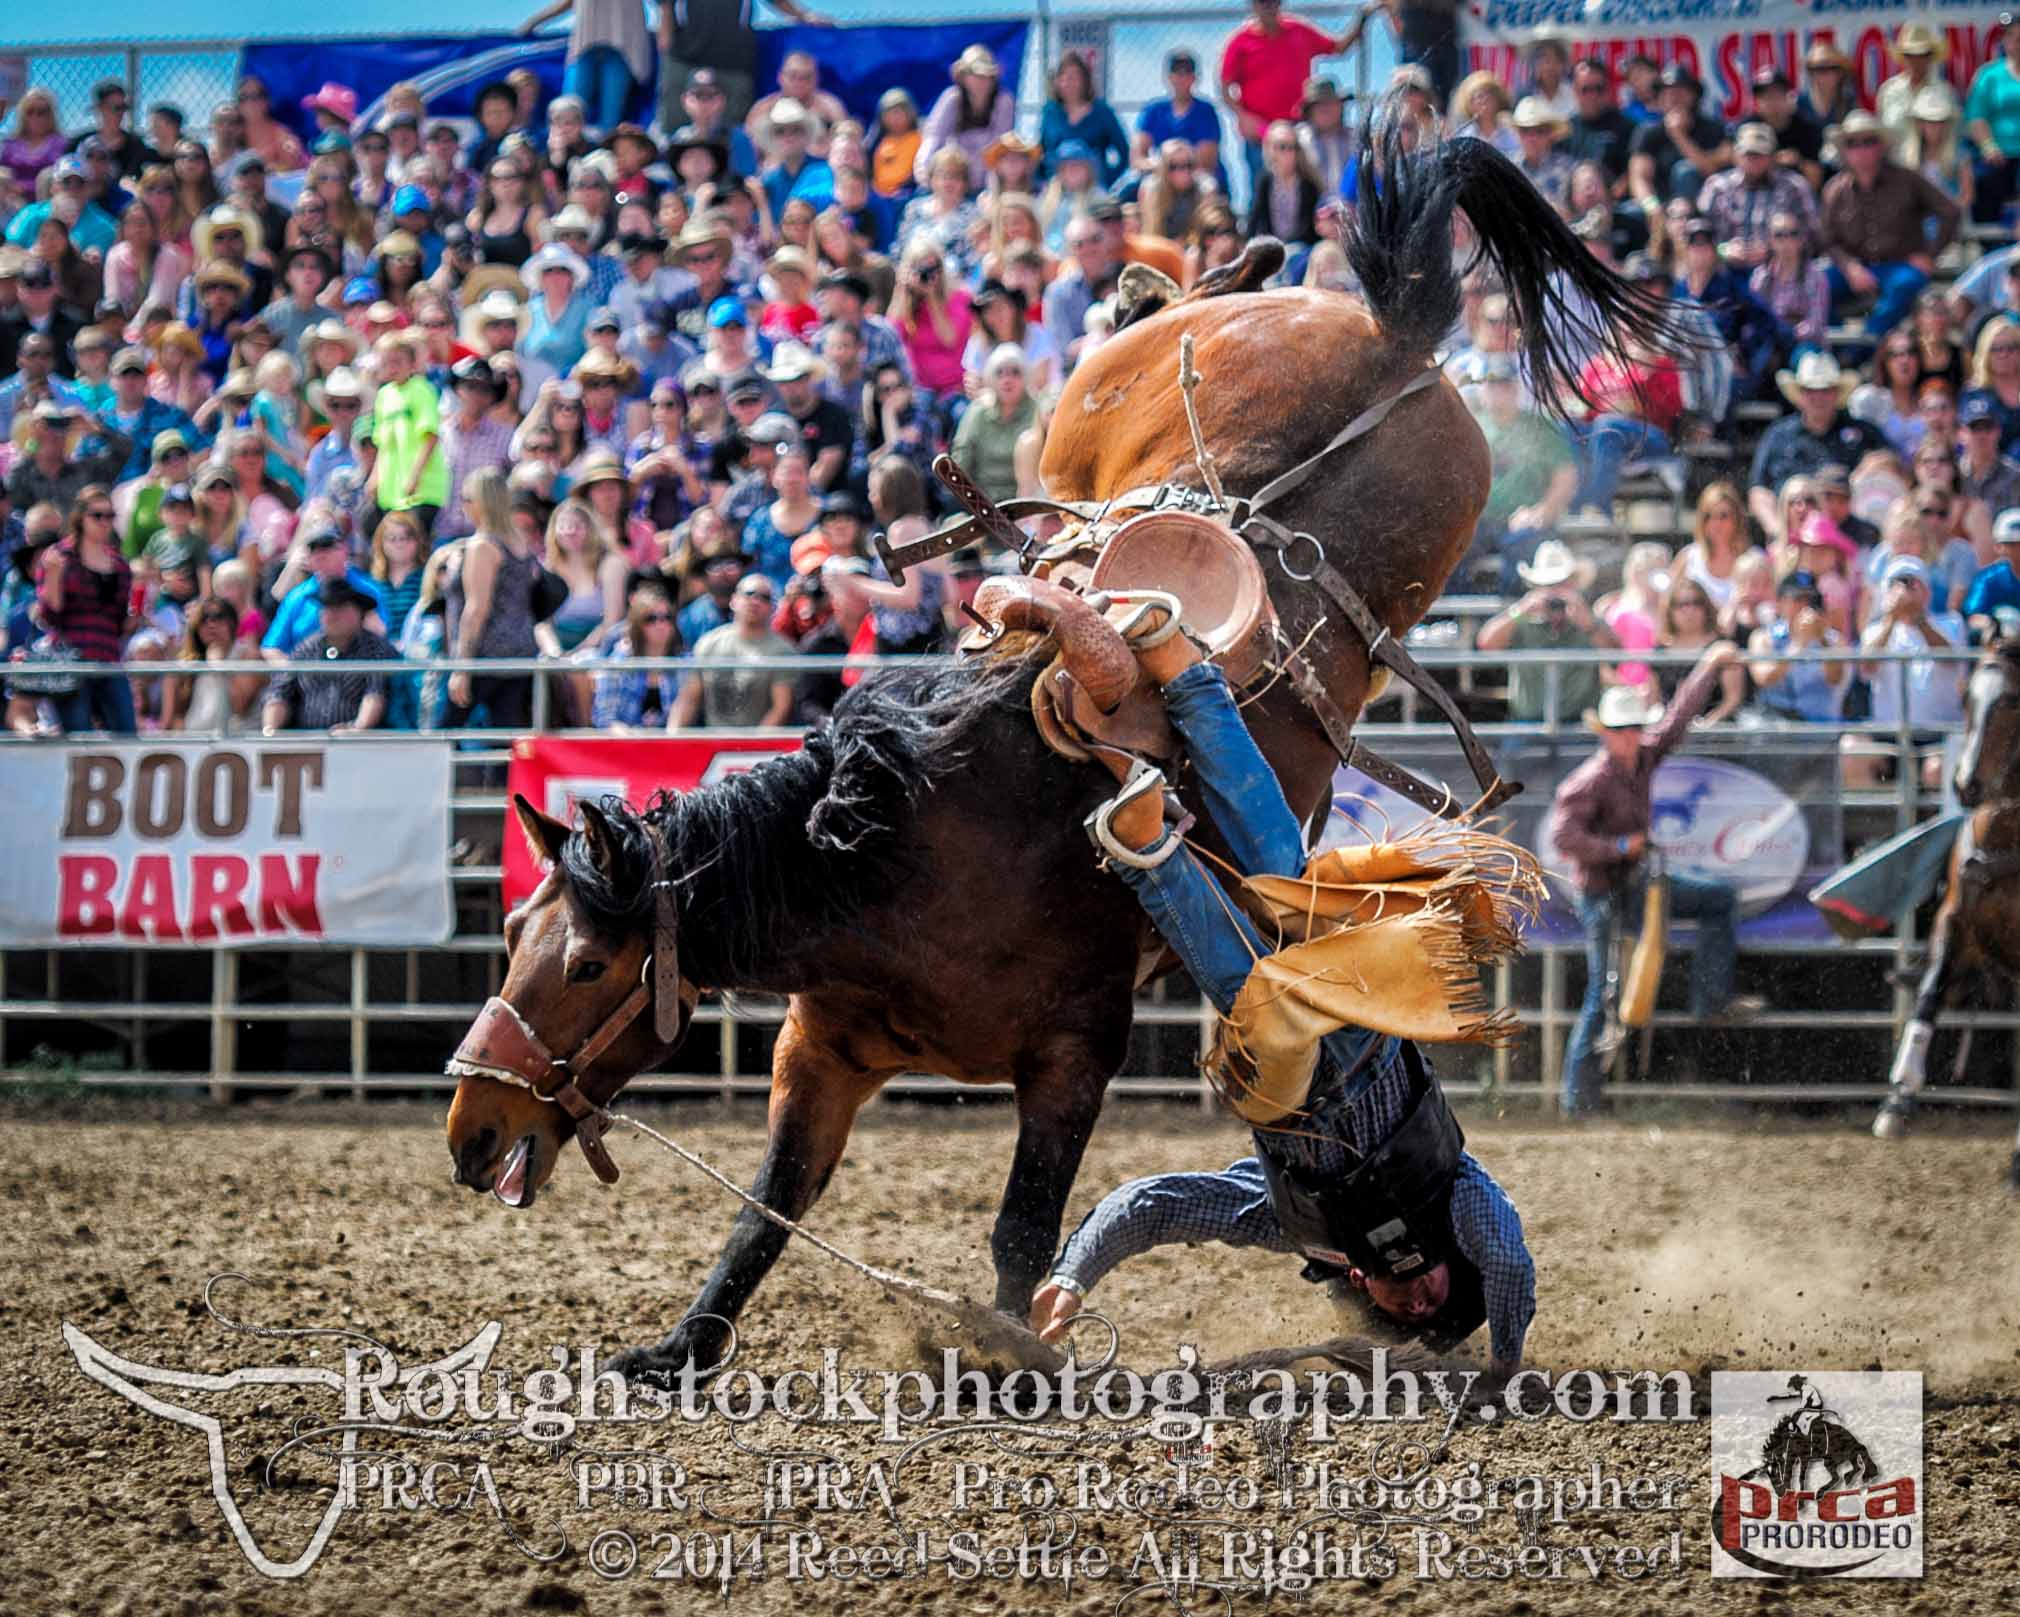 Pro Rodeo Photography by credentialed PRCA PBR IPRA photographer